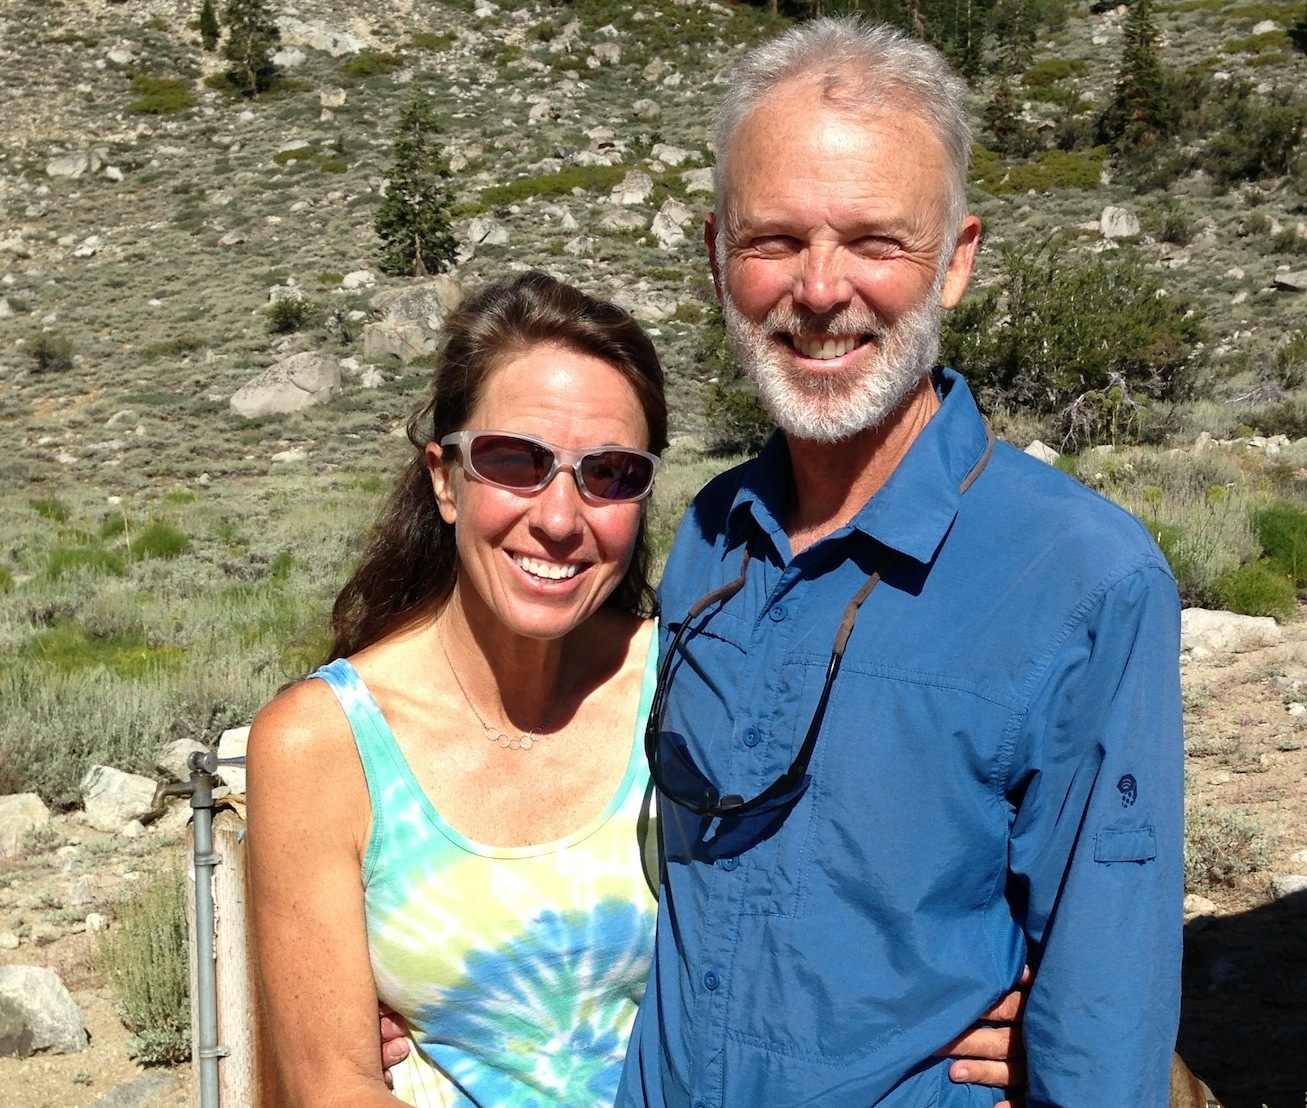 JMT hikers Noni and Craig from Washington on Aug. 13. Come back and visit the Base Camp!